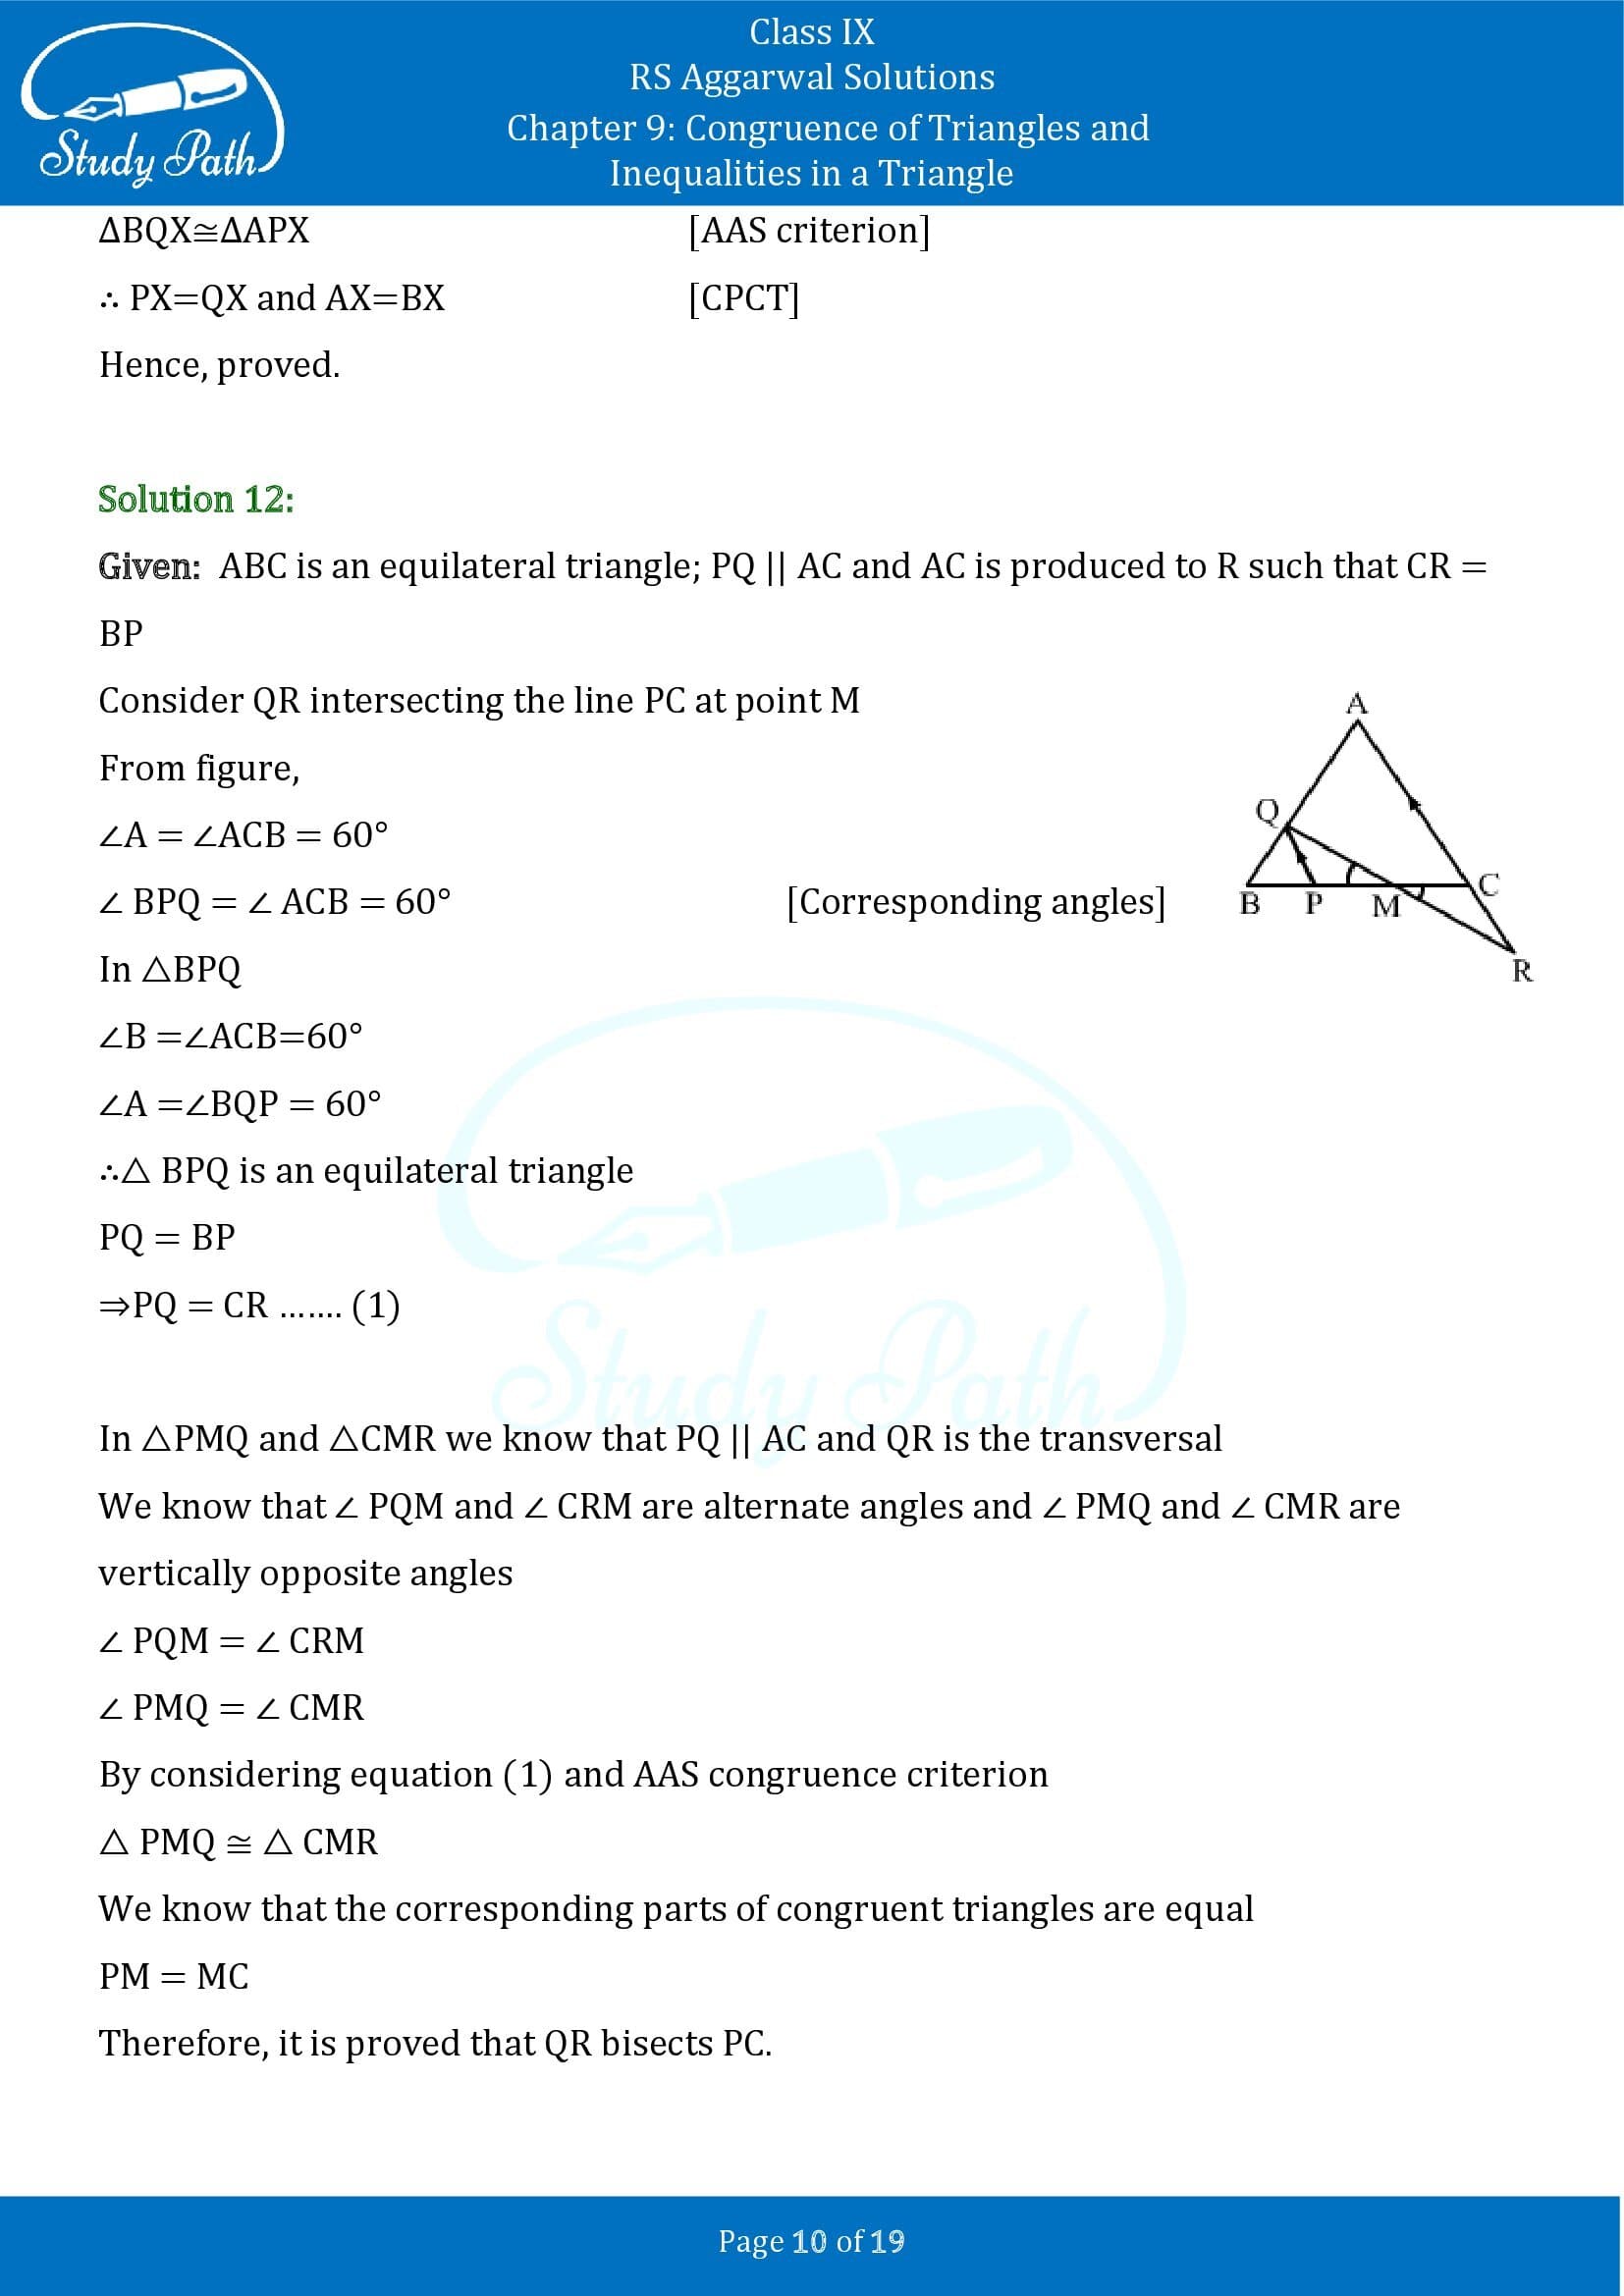 RS Aggarwal Solutions Class 9 Chapter 9 Congruence of Triangles and Inequalities in a Triangle Exercise 9A 0010